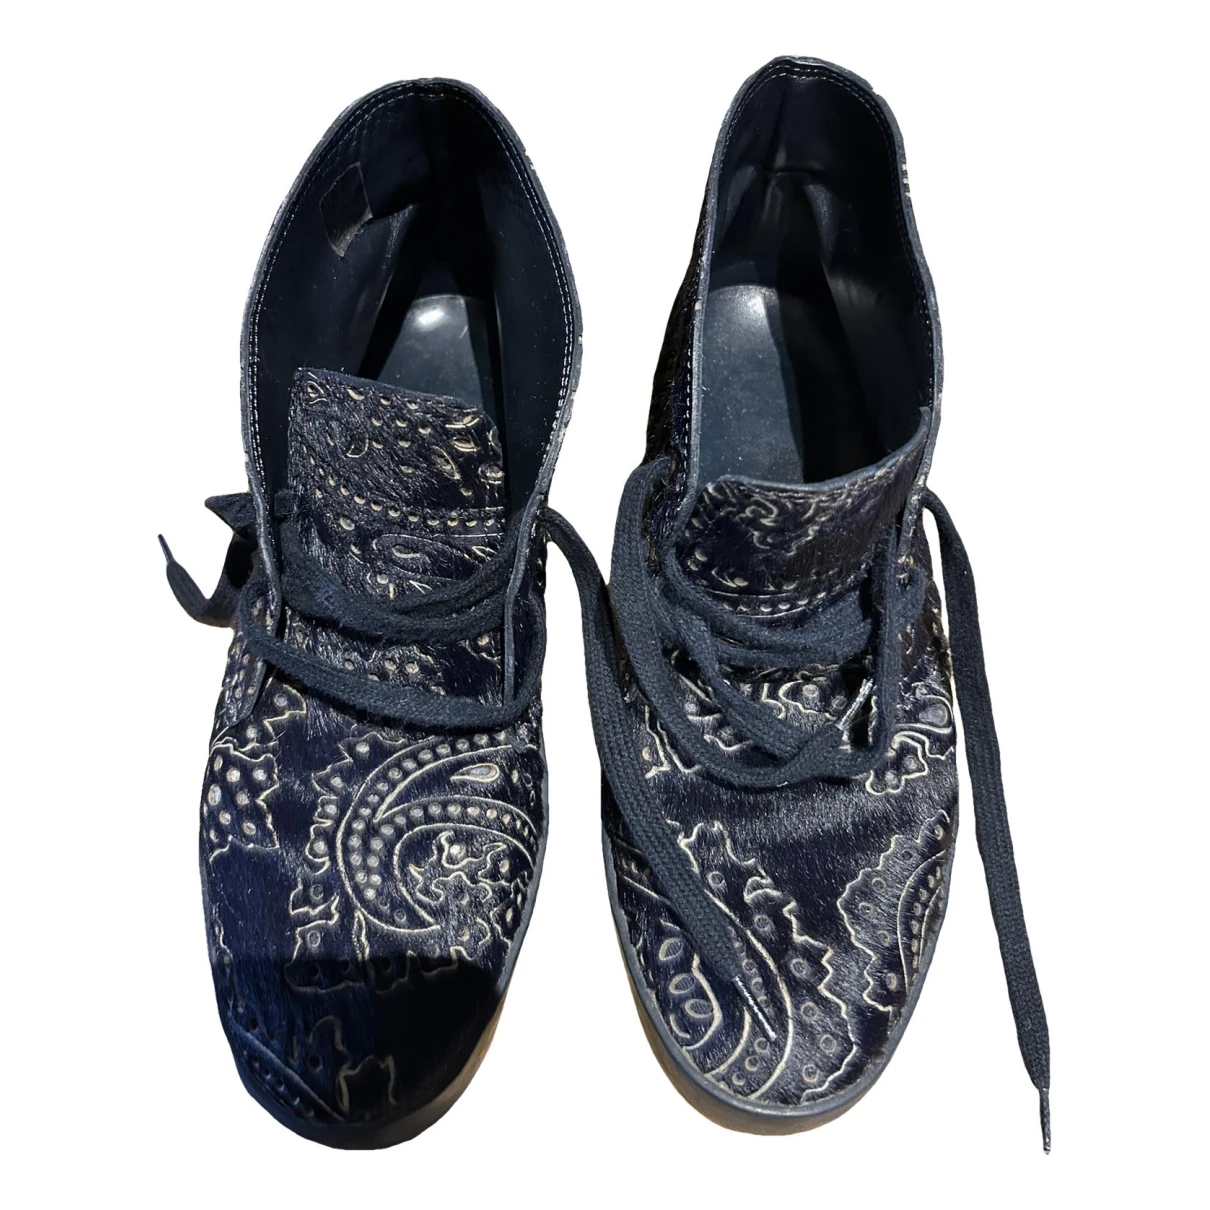 Pre-owned Penelope Chilvers Cloth Lace Ups In Navy